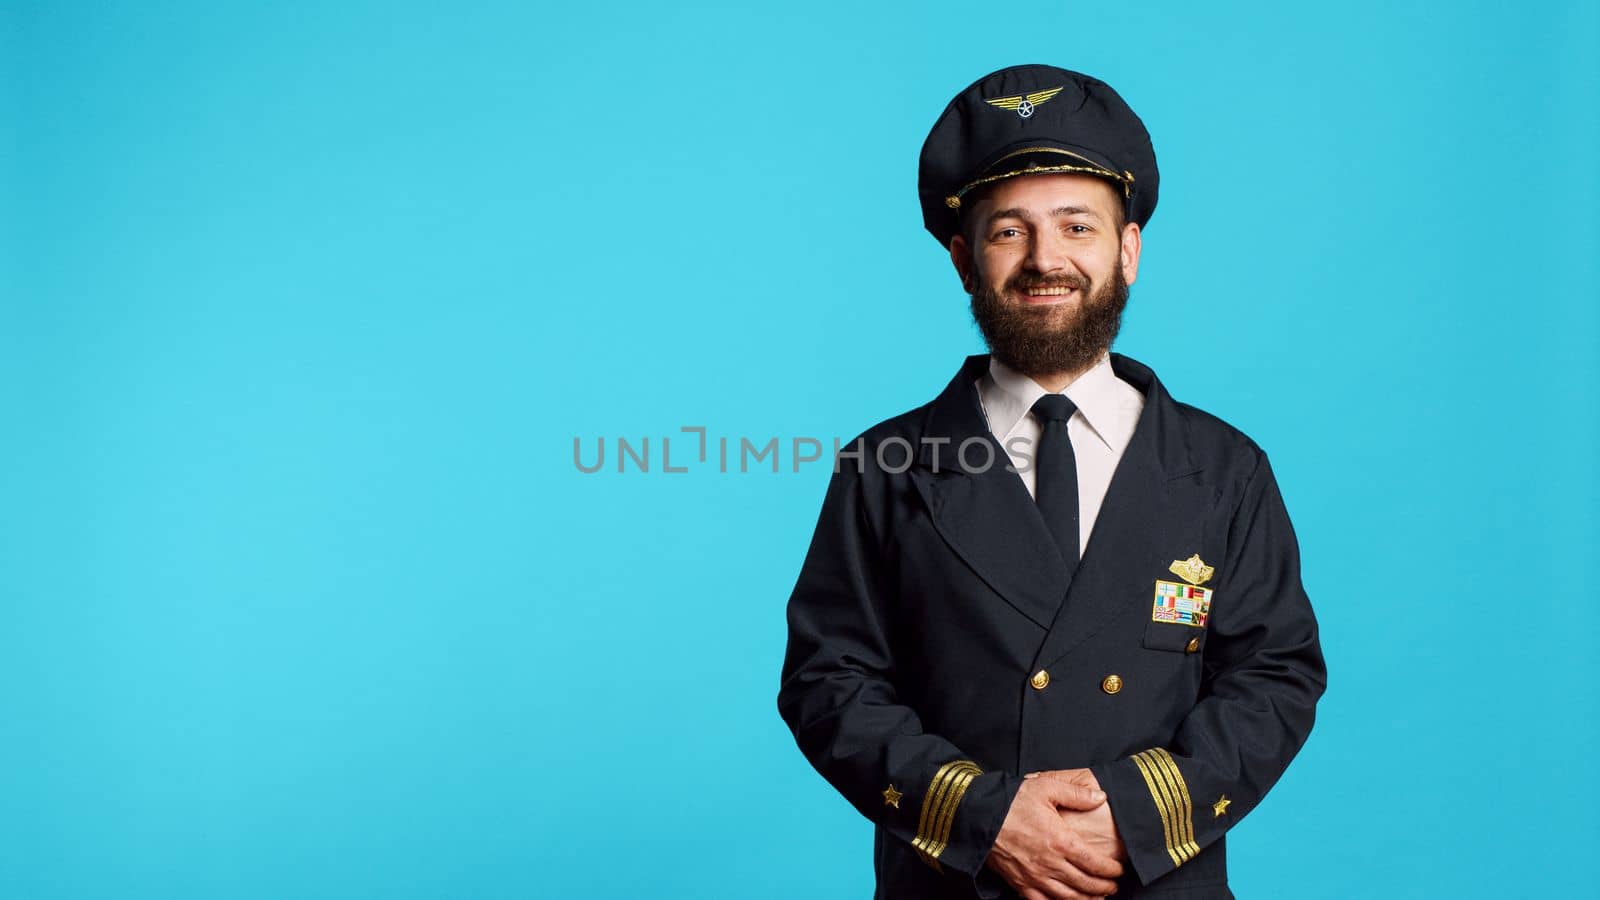 Male plane captain wearing airline uniform and posing by DCStudio